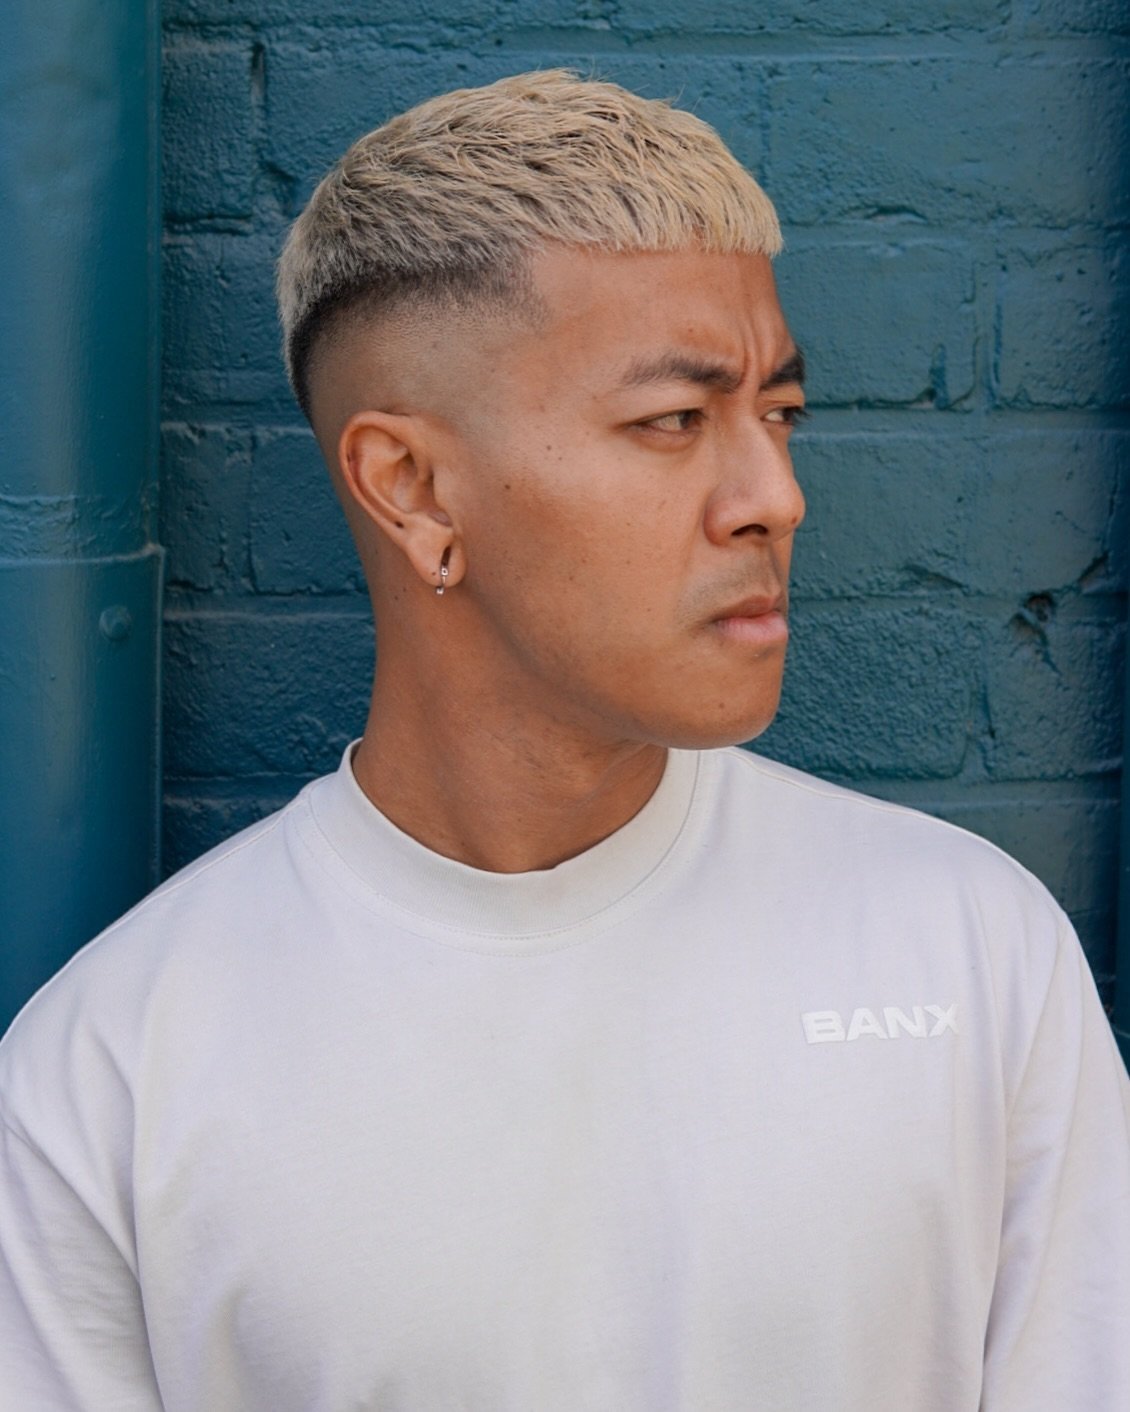 We love how the regrowth makes the skin fade and colour pop. 💥

______________________________

#soulsbys #perth #perthbarber #barber #barbershop #menshairstyle #skinfade #soulsbysbarbers #perthbarbershop #menshaircut #trending #fyp #northperth #per